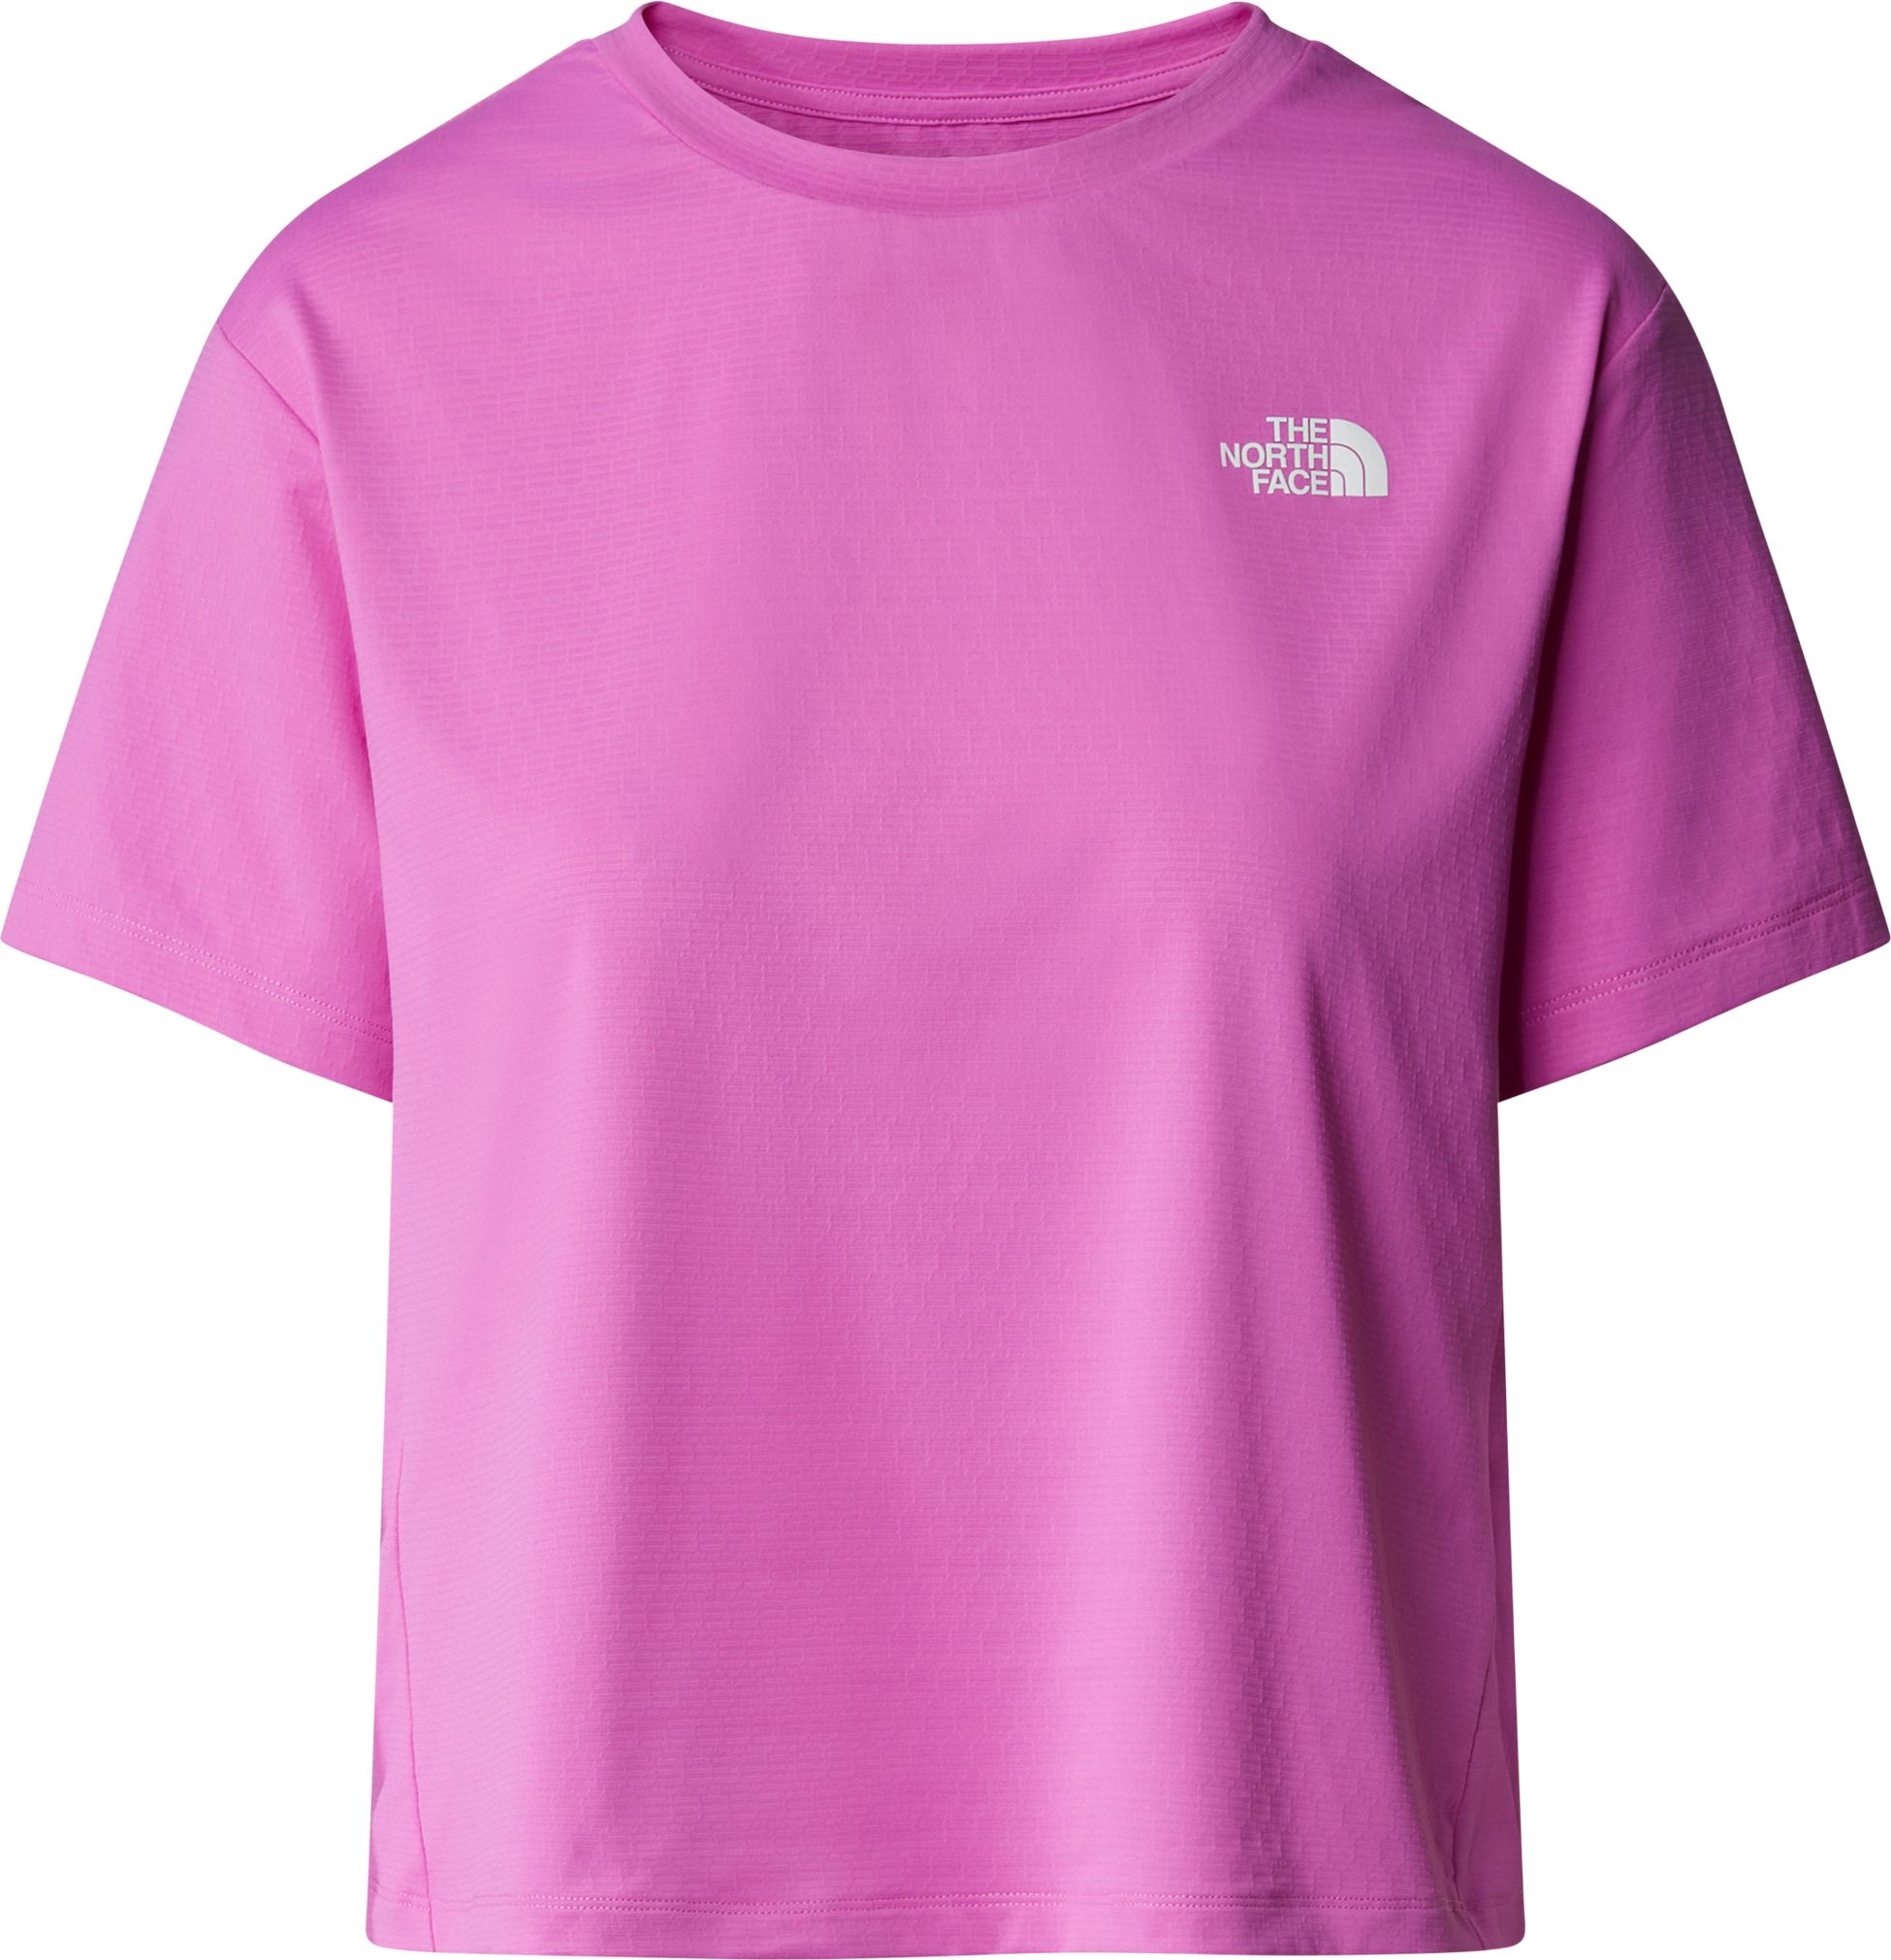 THE NORTH FACE, W FLEX CIRCUIT S/S TEE